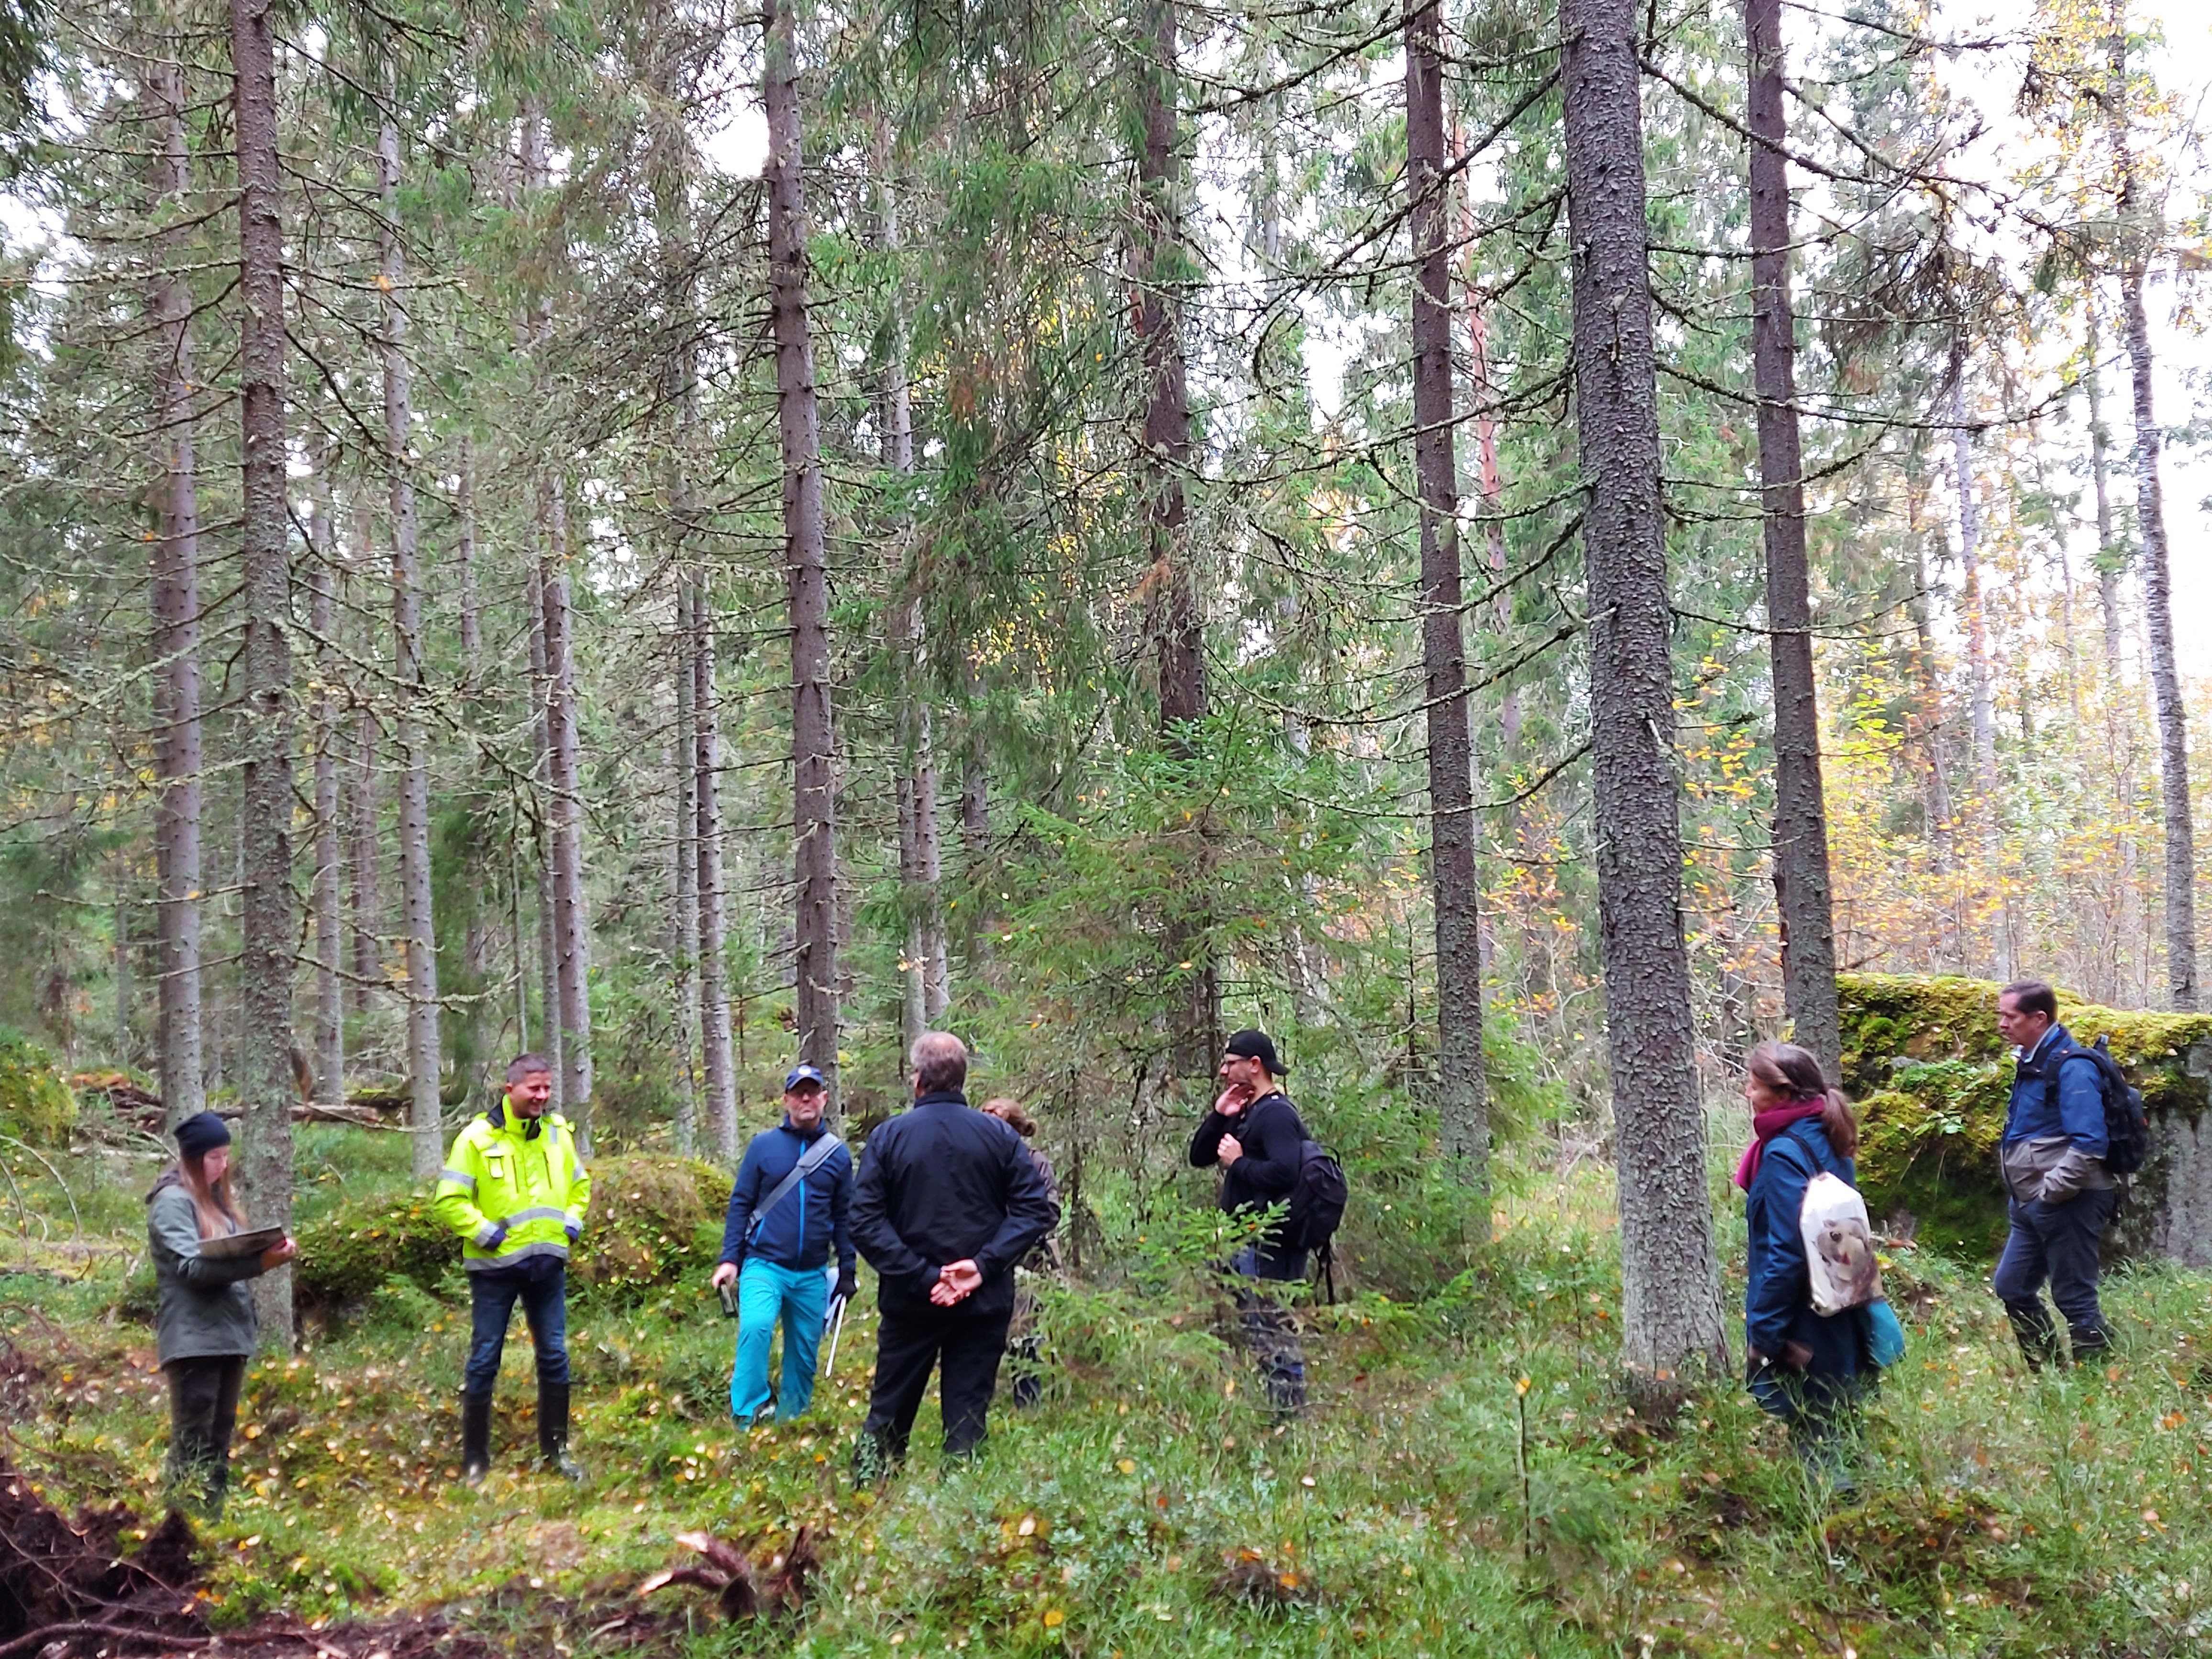 People standing and discussing in a forest.